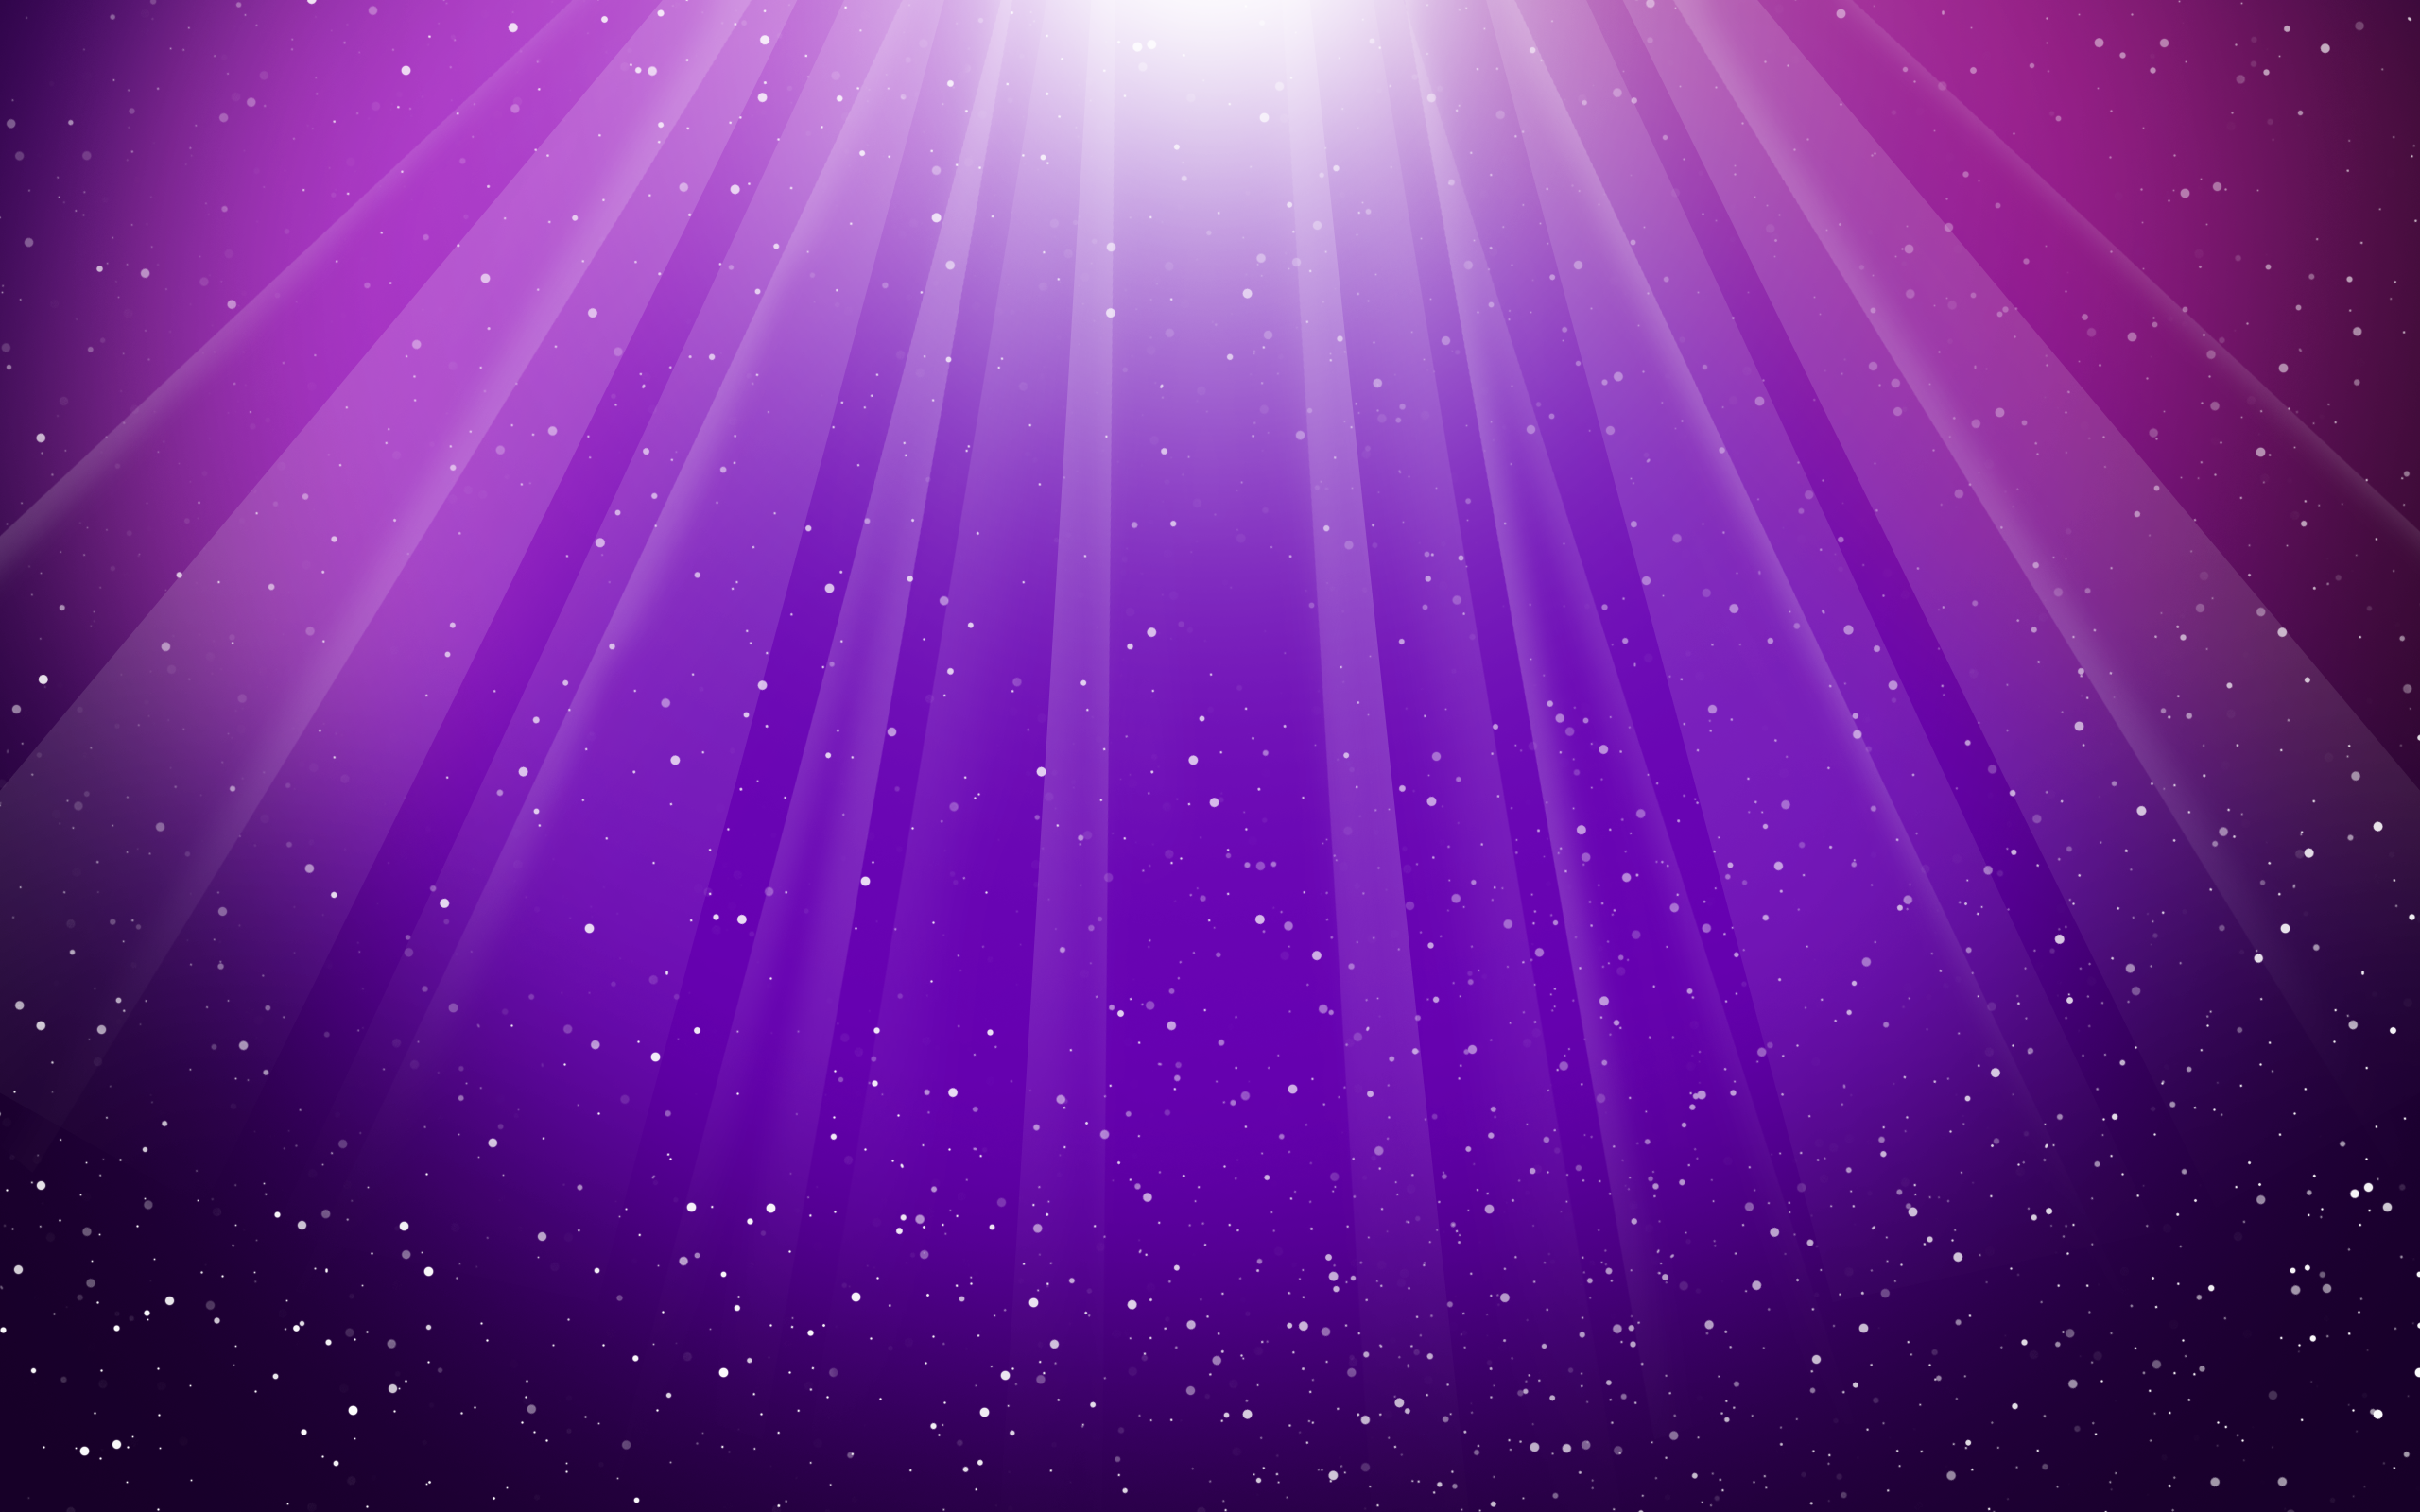 43 Hd Purple Wallpaper Background Images To Download For Free